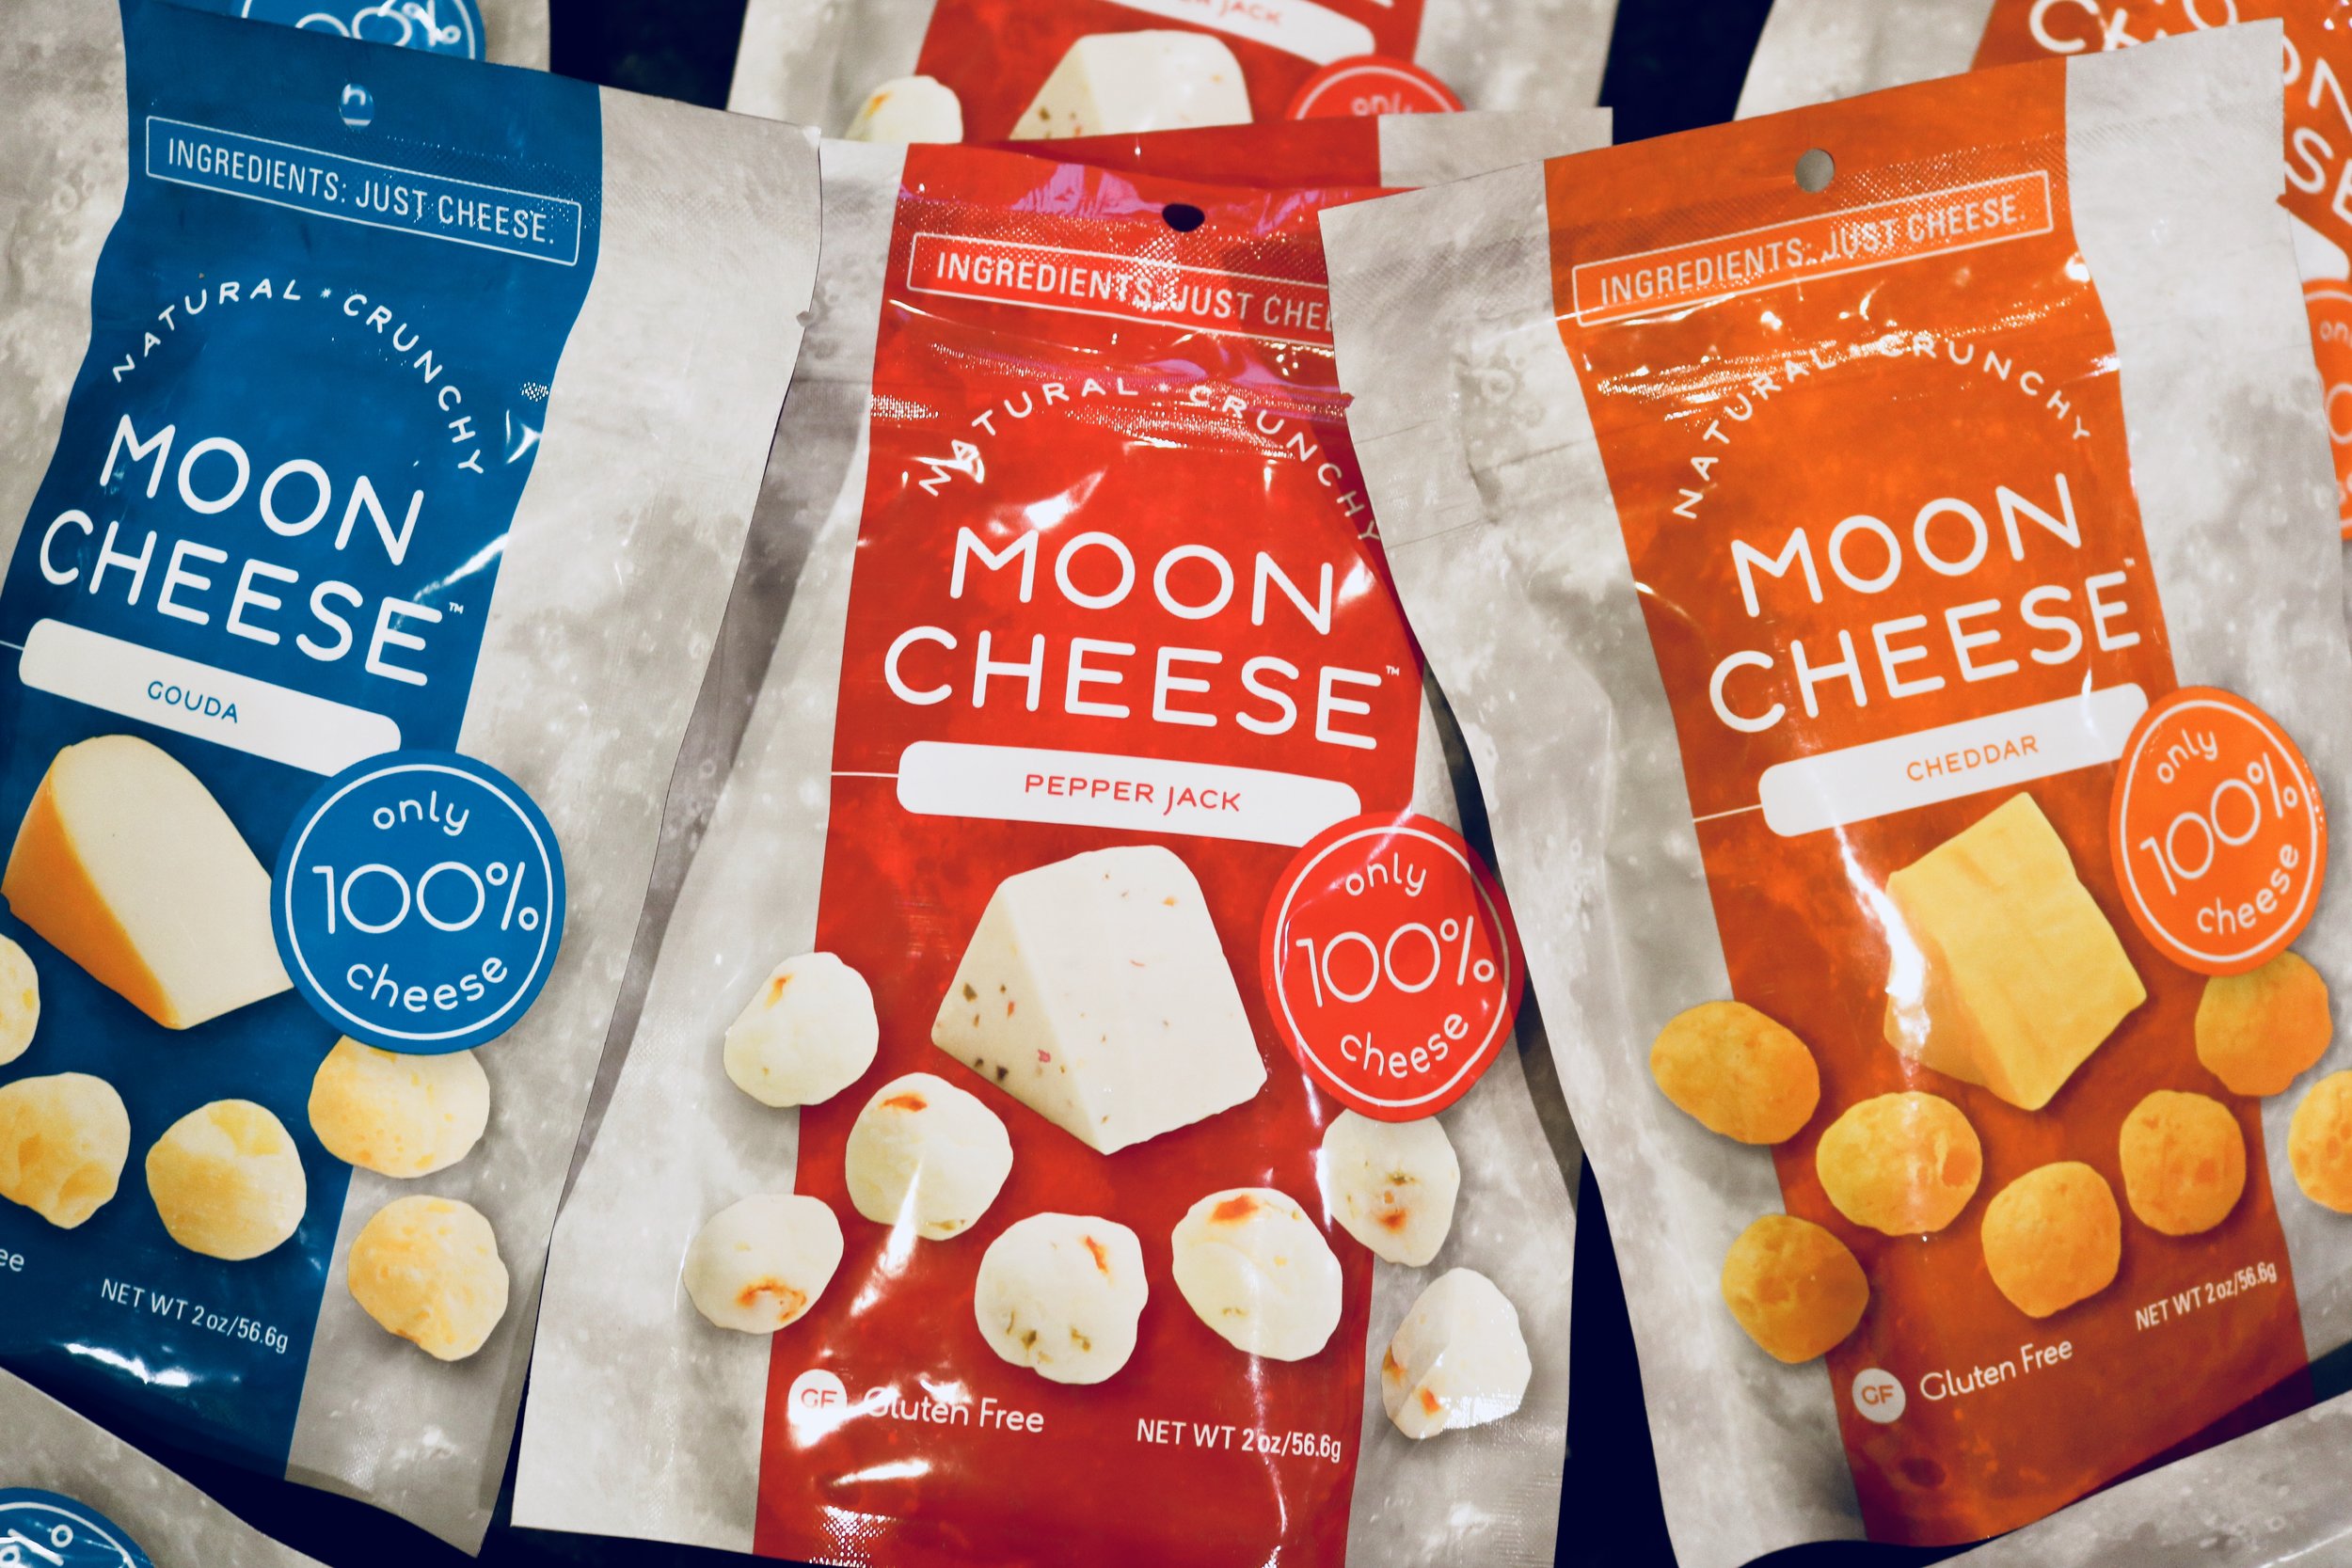 An assortment of Moon Cheese Snacks in Gouda, Pepper Jack and Cheddar flavors